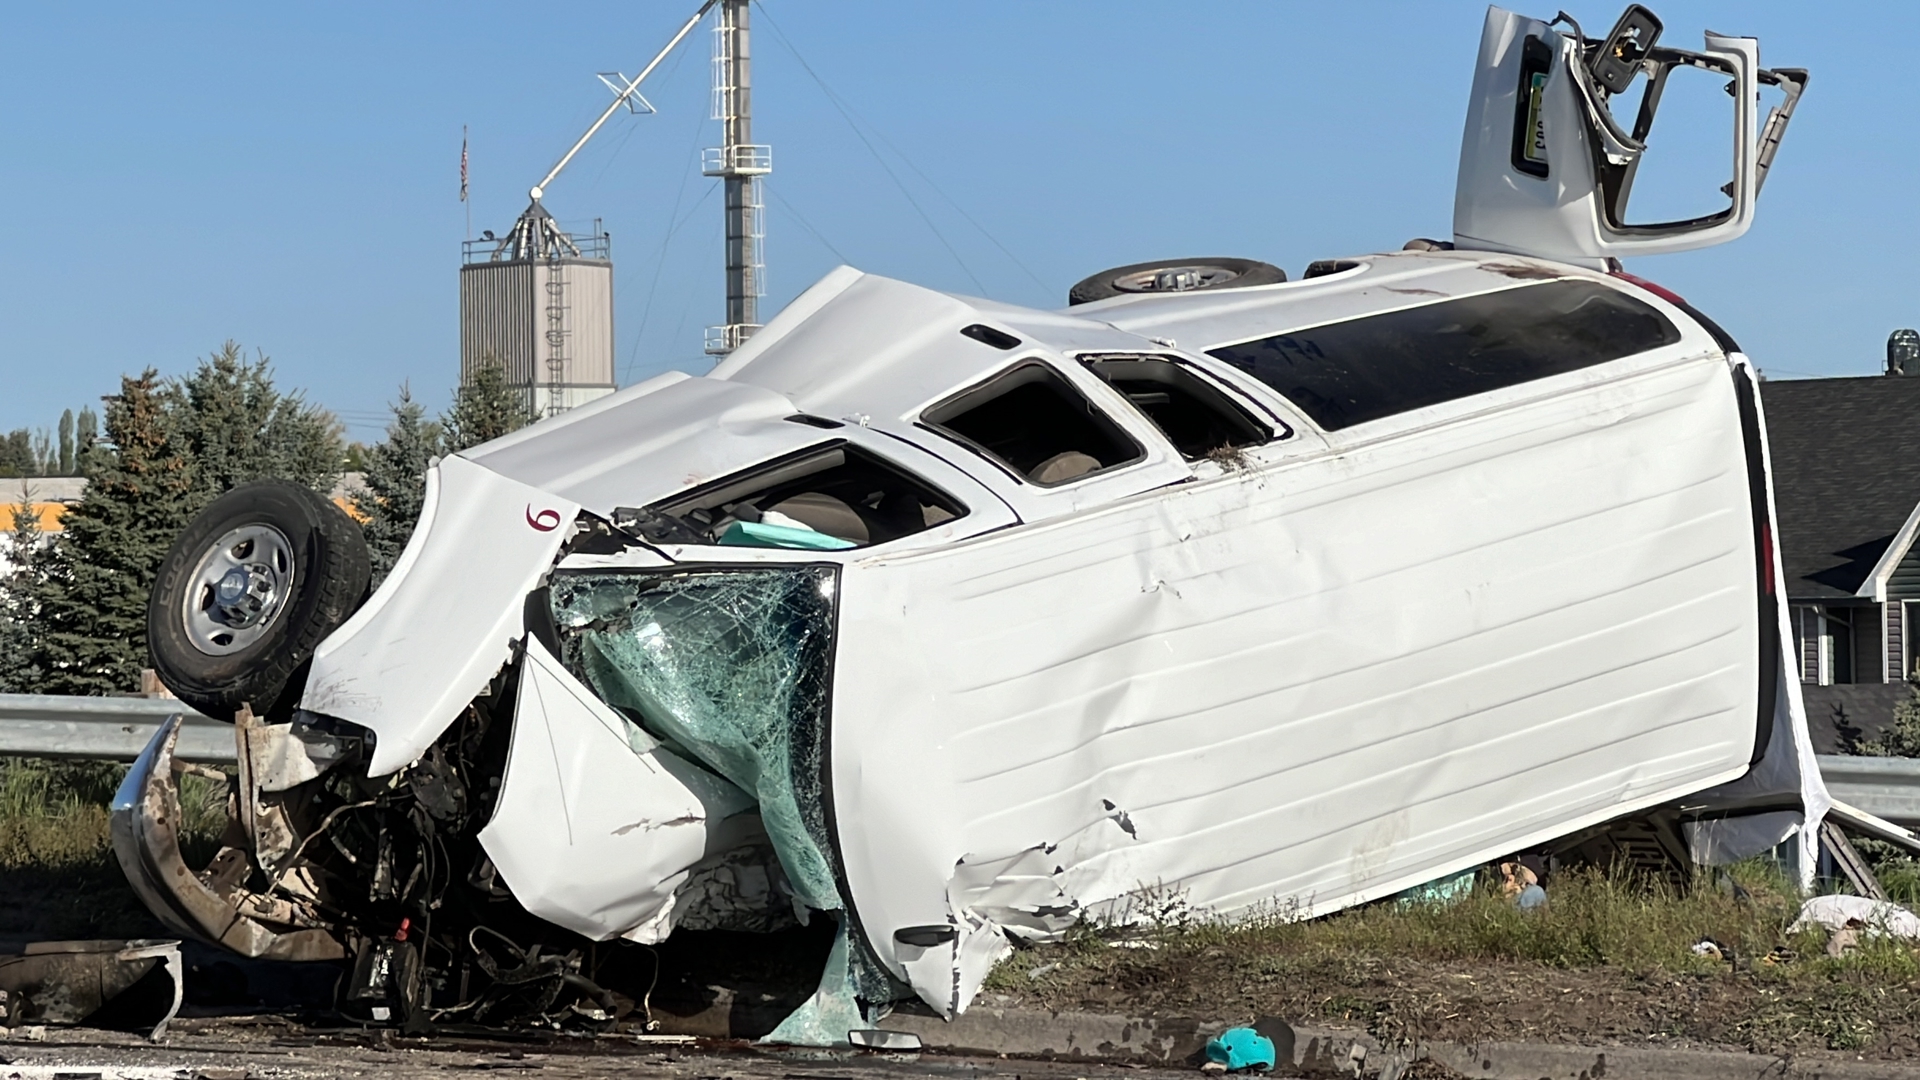 Six people died and ten others were injured after a 2-vehicle crash on US-20 near in Idaho Falls on Saturday, May 18.